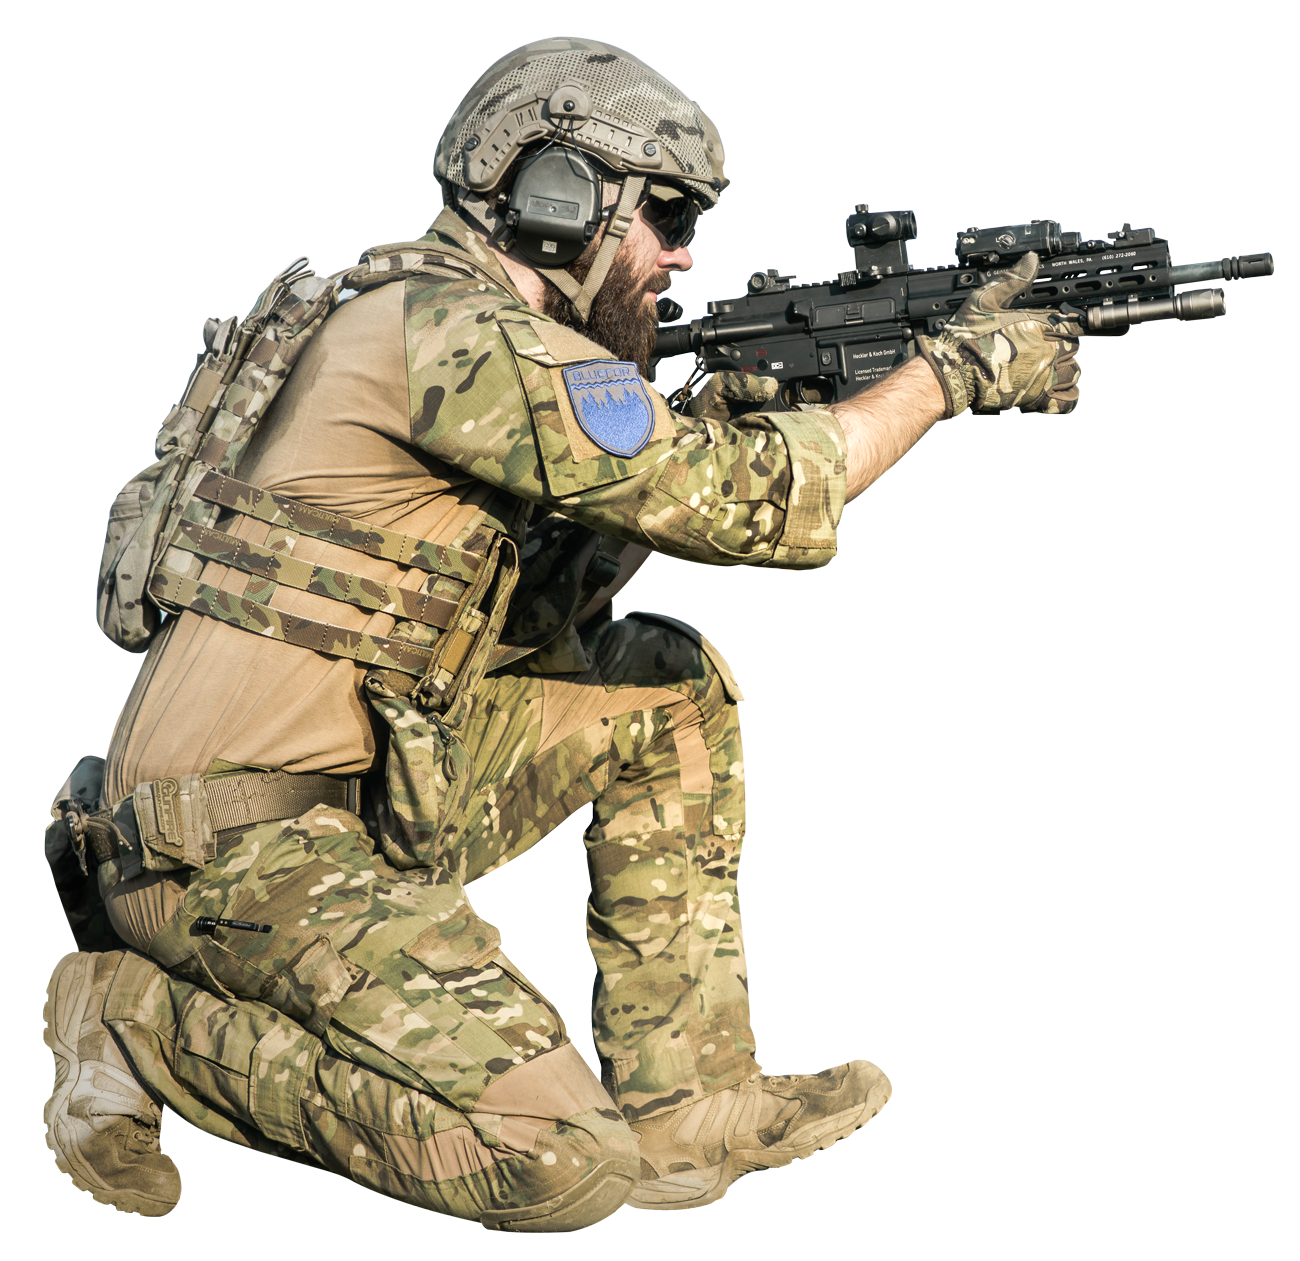 File:BF2 M4 Soldier.png